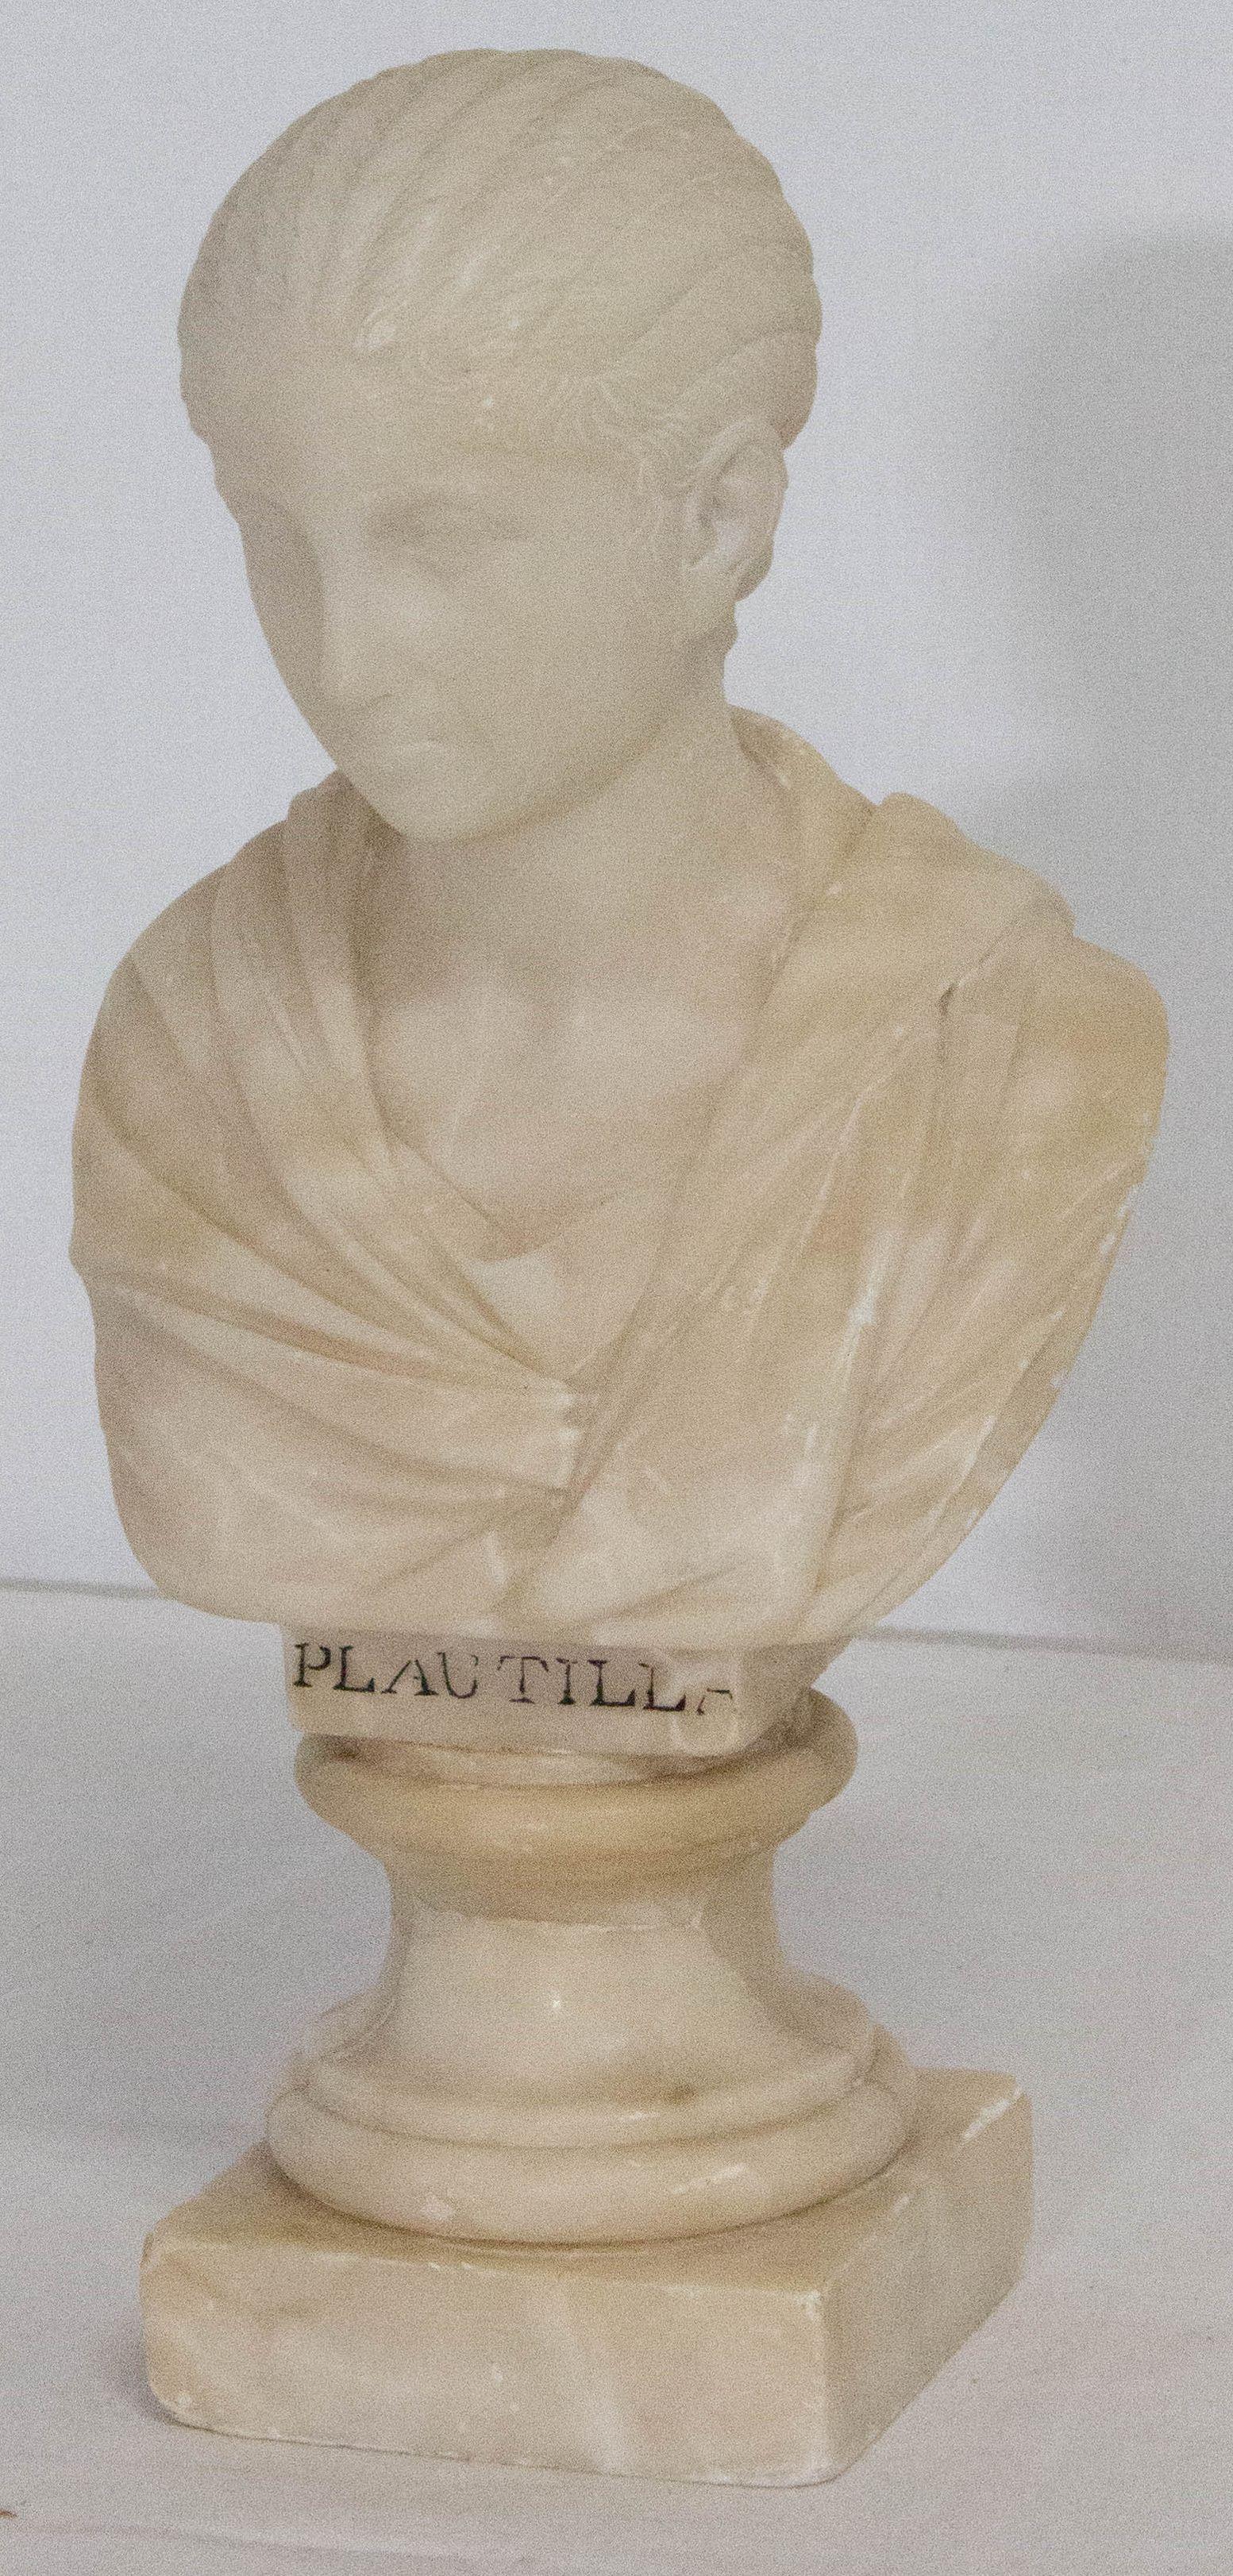 Arts deco neoclassic Plautilla alabaster bust, circa 1930
white alabaster marble
Handcrafted in the neoclassic style
Very good condition

For shipping: H 29 x W 13.5 x D 11.5 2.9 kg.